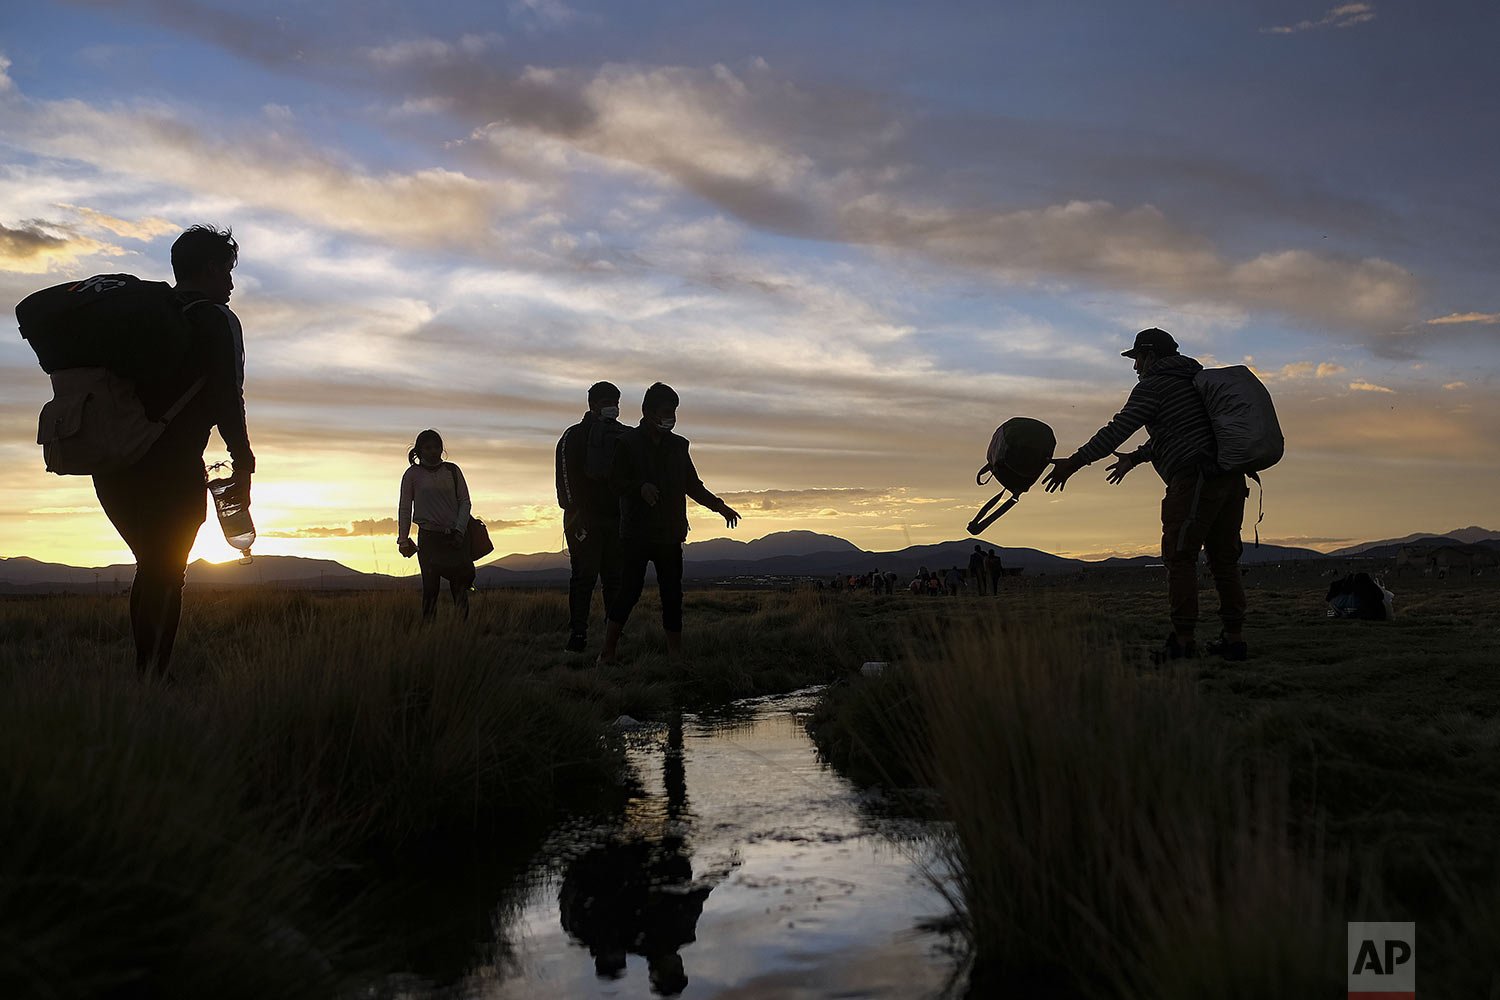  Migrants cross a stream after crossing into Chile from Bolivia, near Colchane, Chile, Dec. 9, 2021. (AP Photo/Matias Delacroix) 